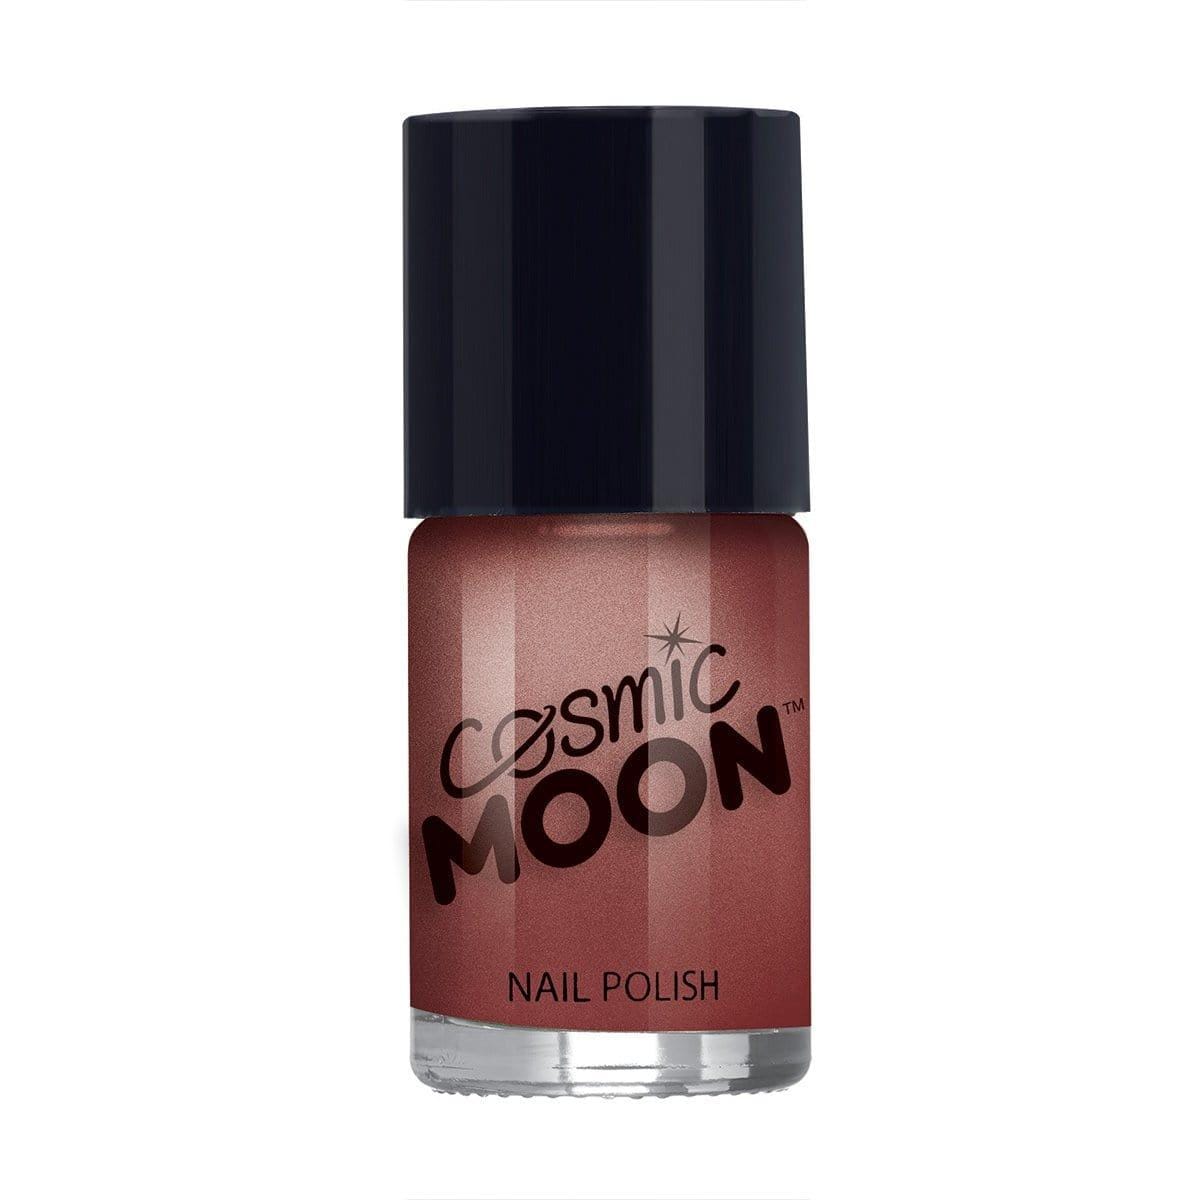 Buy Costume Accessories Moon red metallic nail polish sold at Party Expert